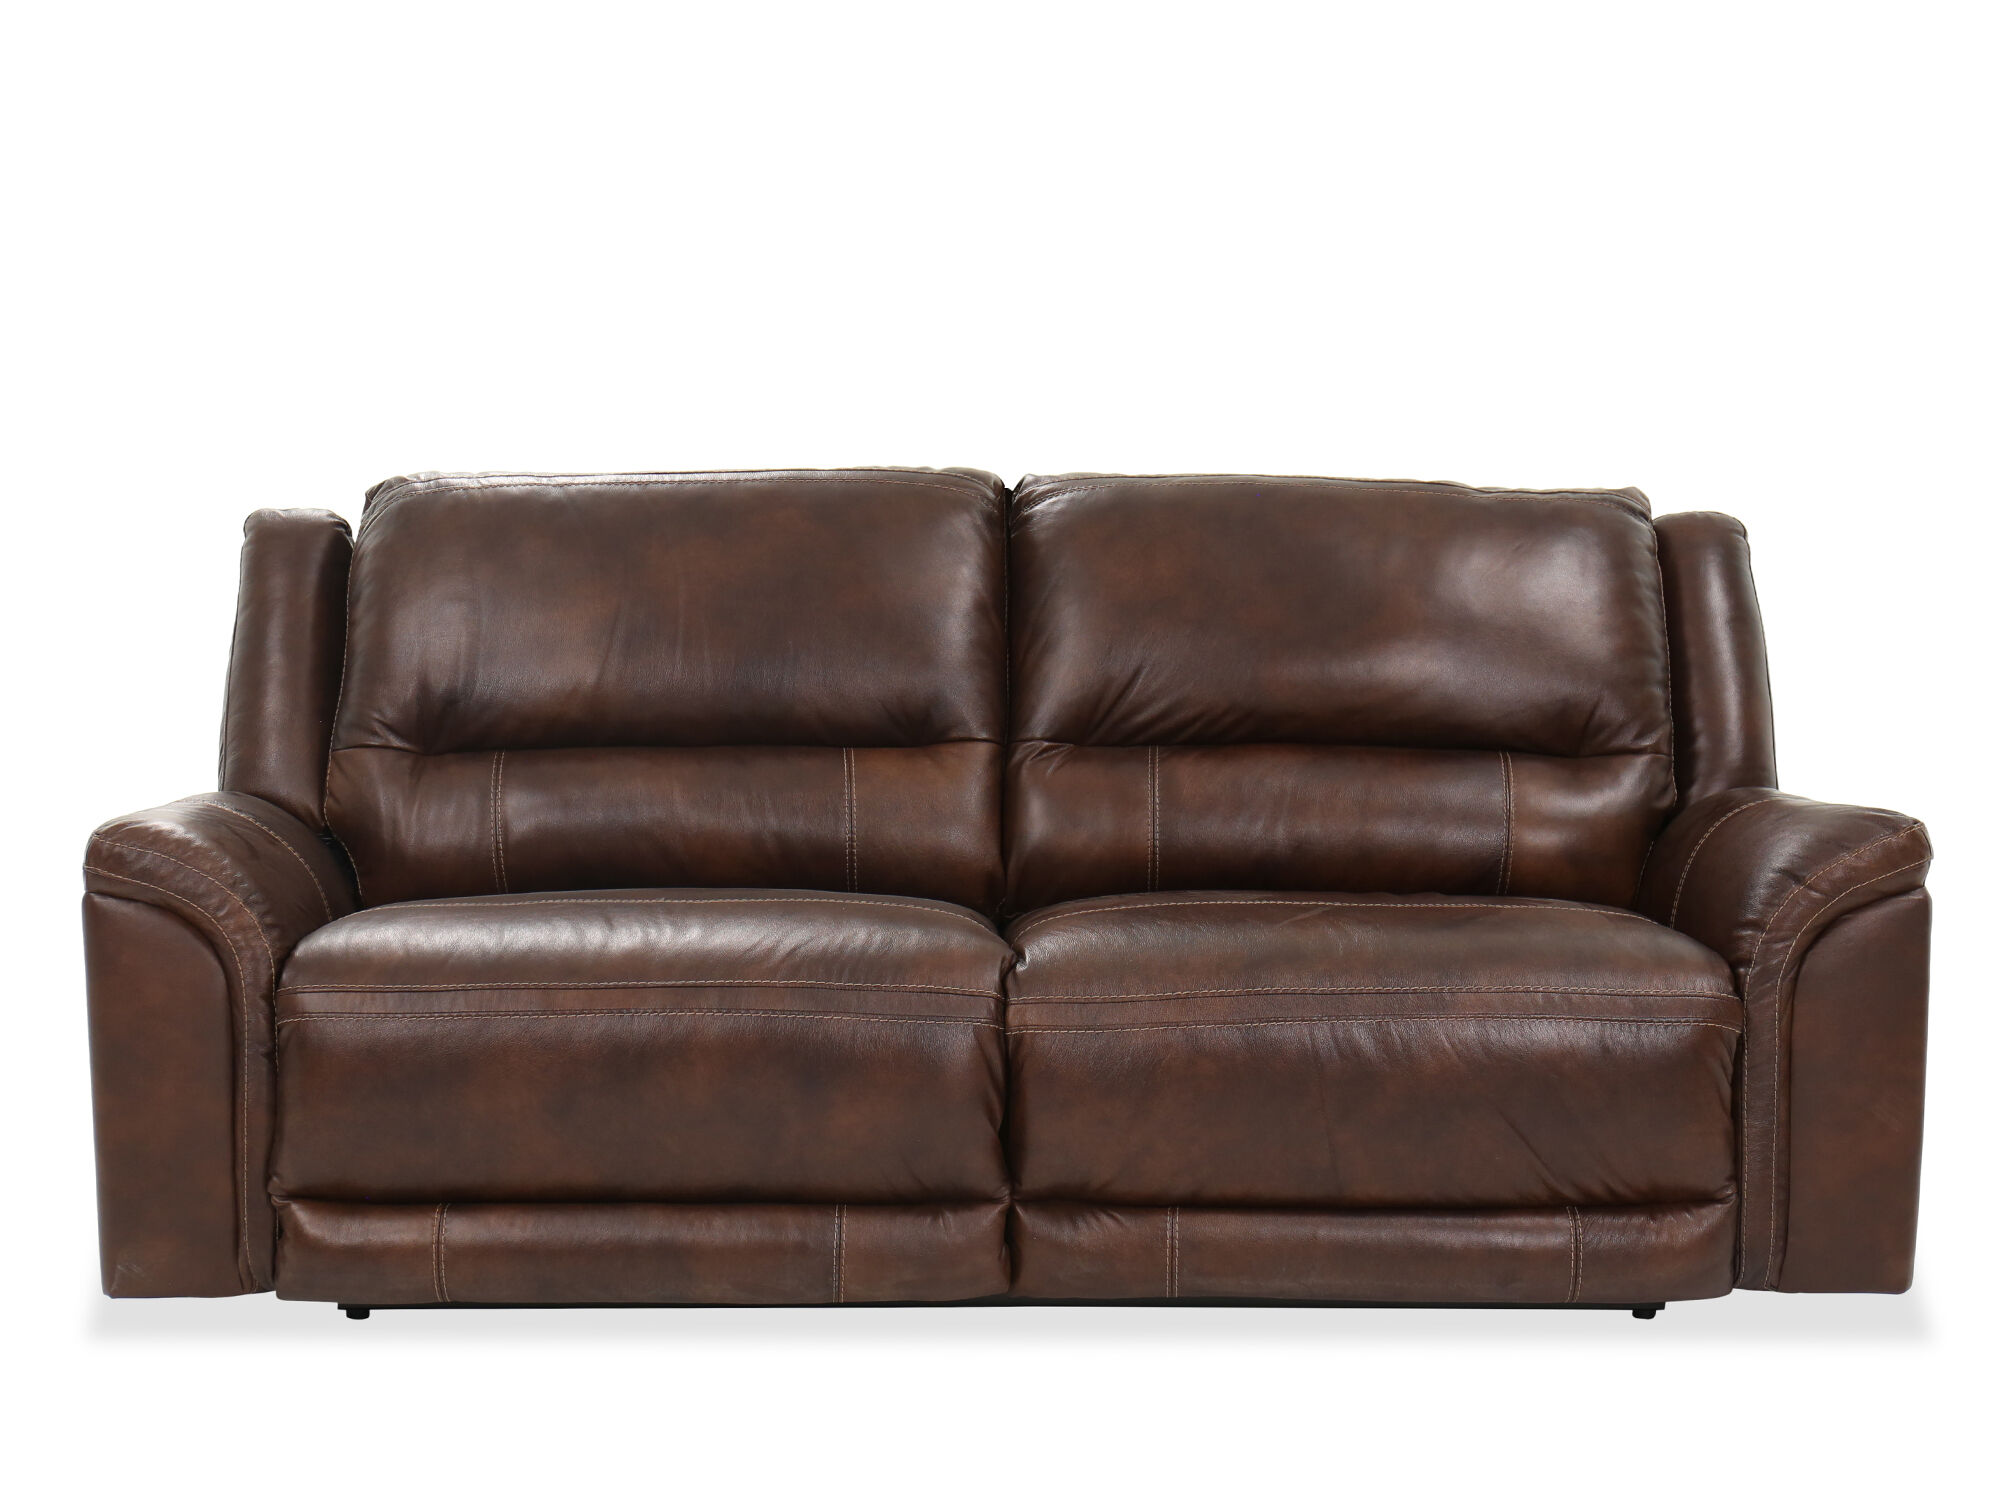 Power Reclining Sofa In Mahogany, Ashley Furniture Recliner Sofa Replacement Parts